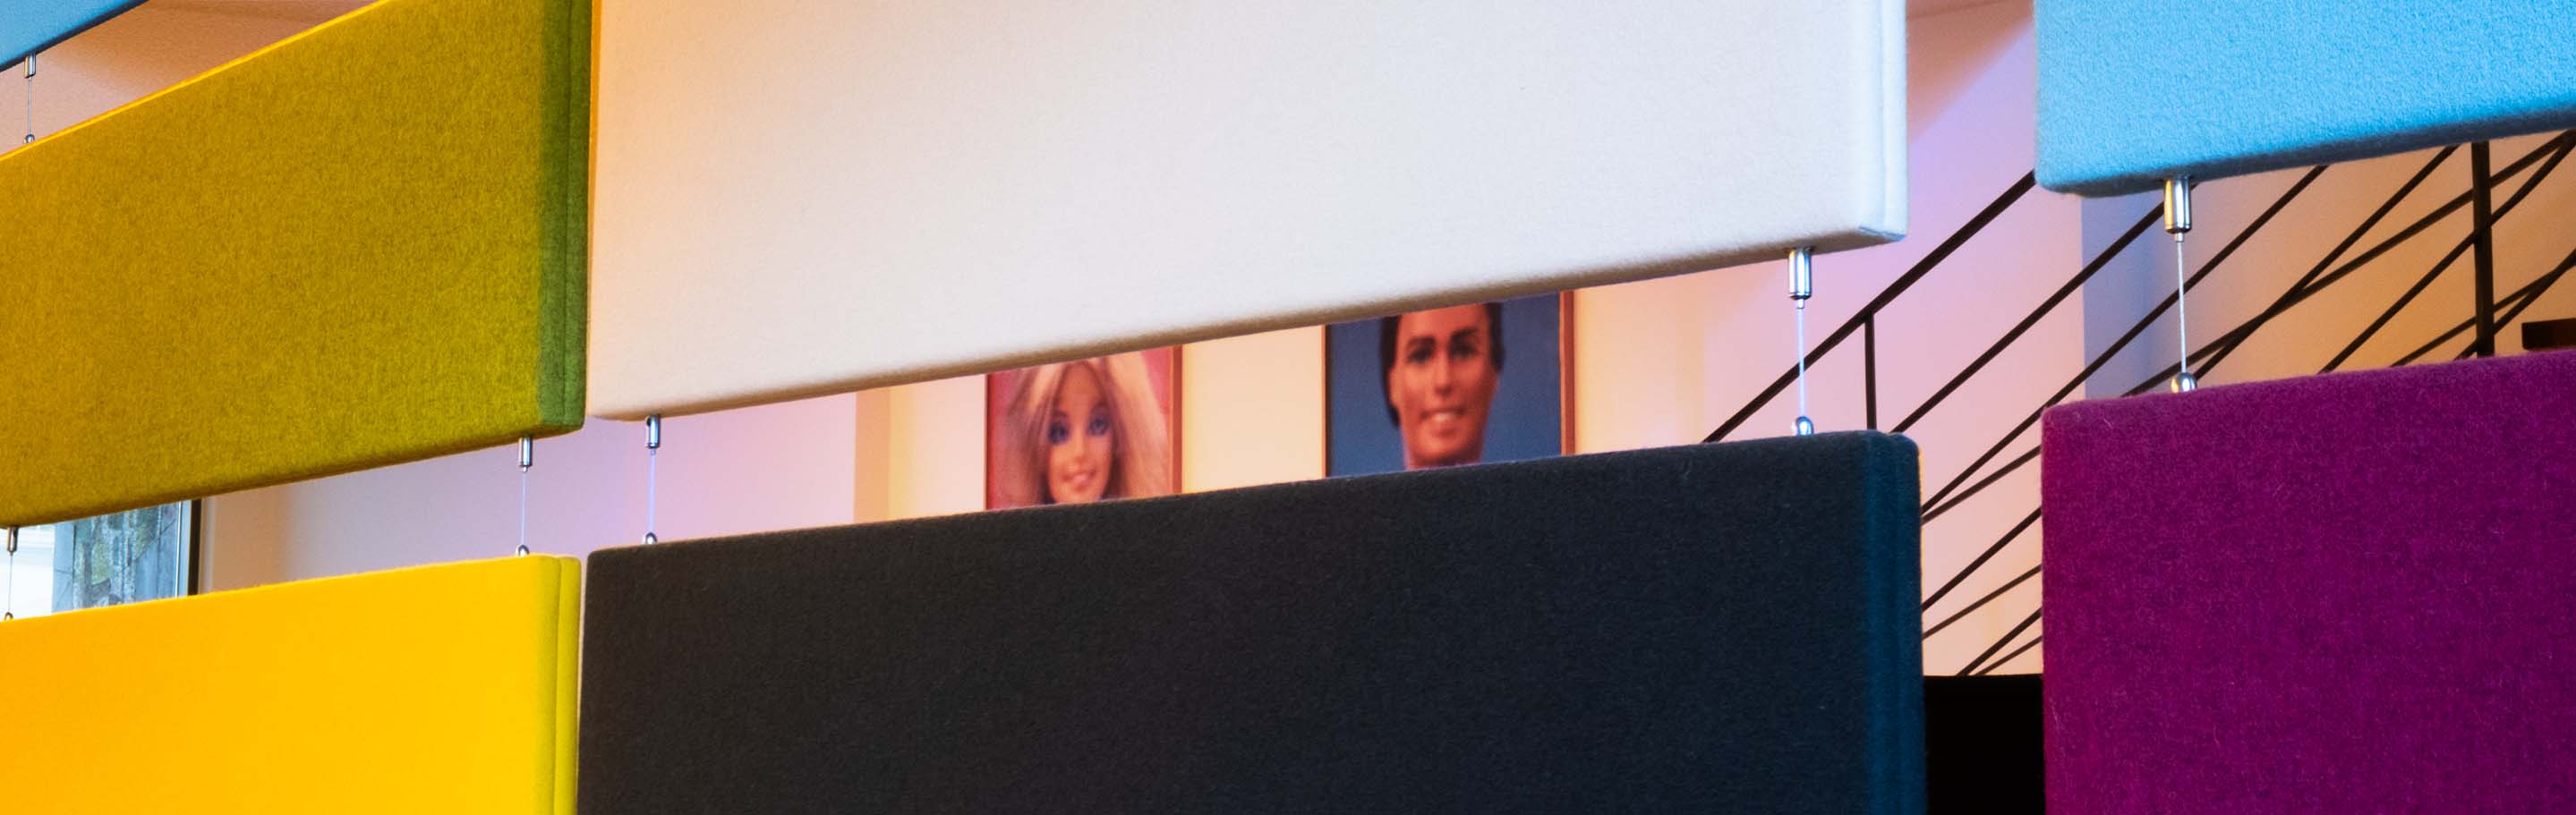 View through colorful hanging textile panels, in the background you can see excerpts from posters with Barbie and Ken